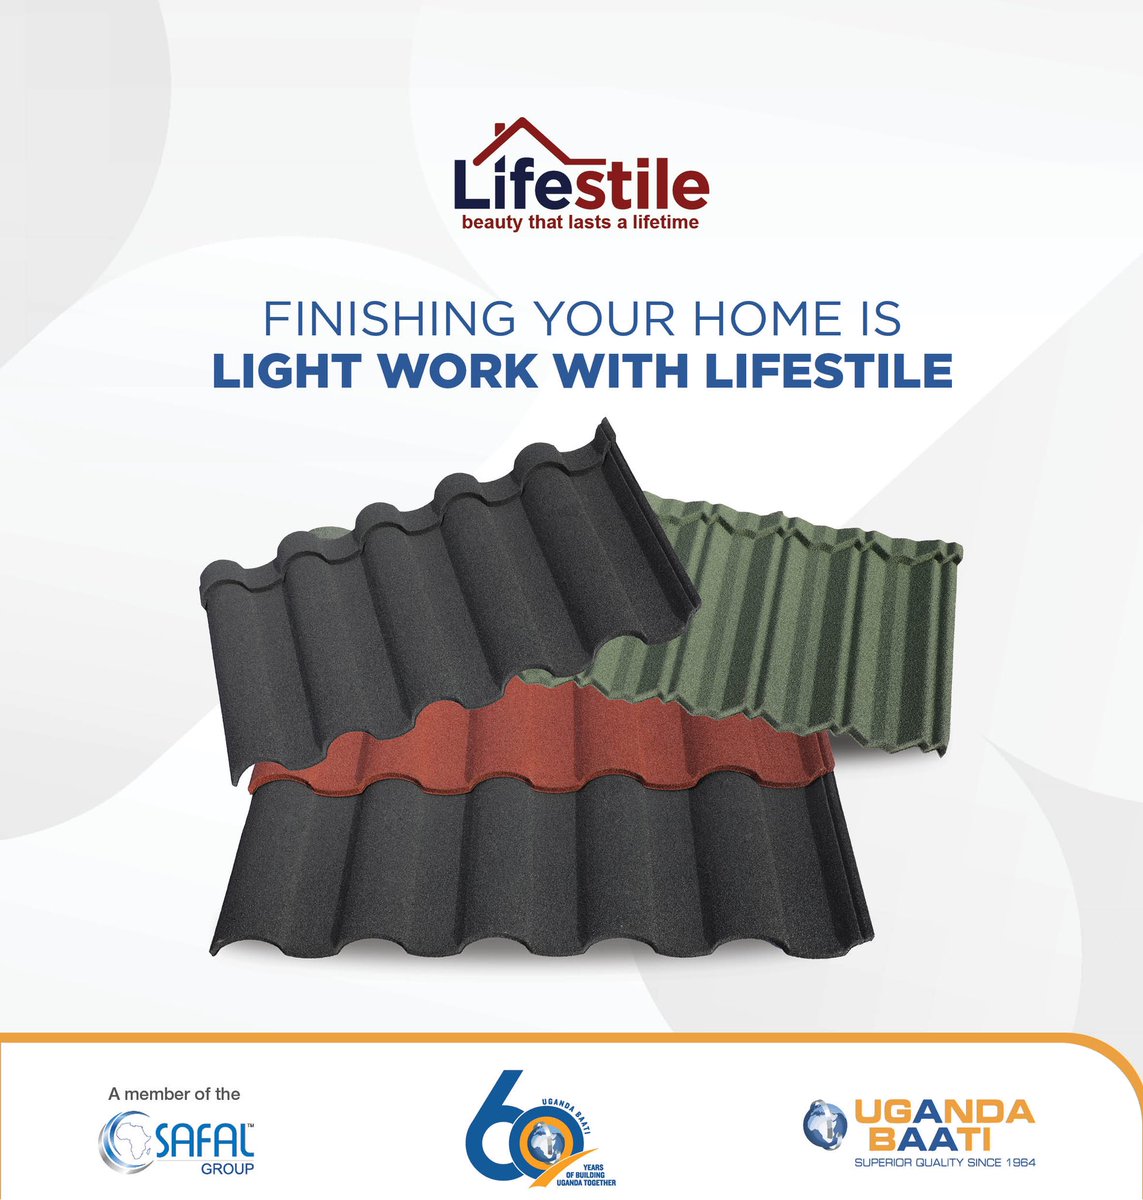 Roof your home with timeless elegance. We have a Lifestile roof profile for every kind of you. They come in Shingle, Wave and Roman profiles. @UgandaBaati #UgandaBaatiAt60 #LifestileStonecoatRoofTiles #SuperiorQualitySince1964